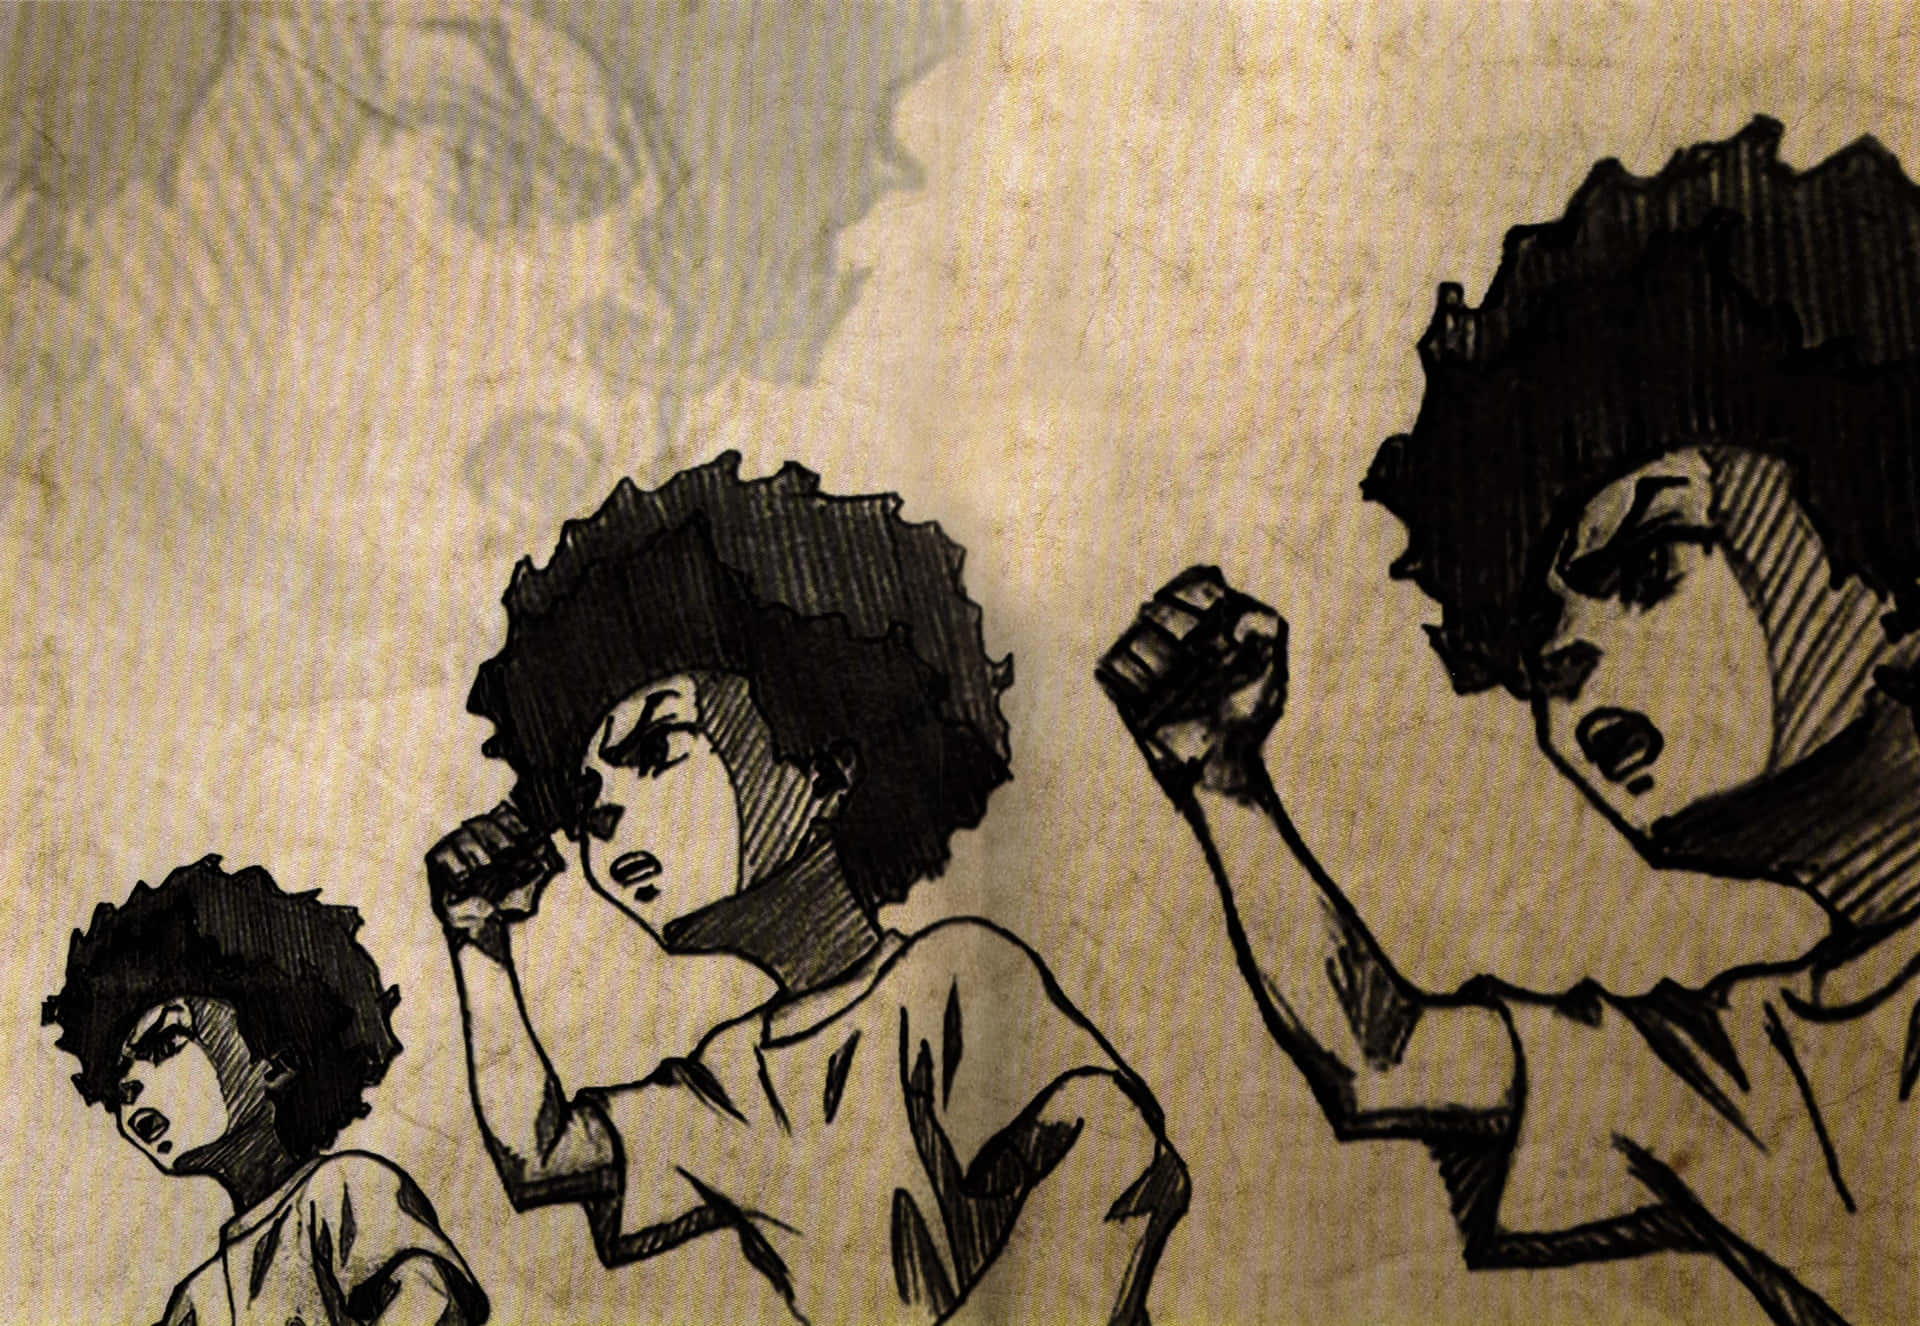 "The Boondocks Follow Up Series Is Here And It's More Exciting Than Ever!"